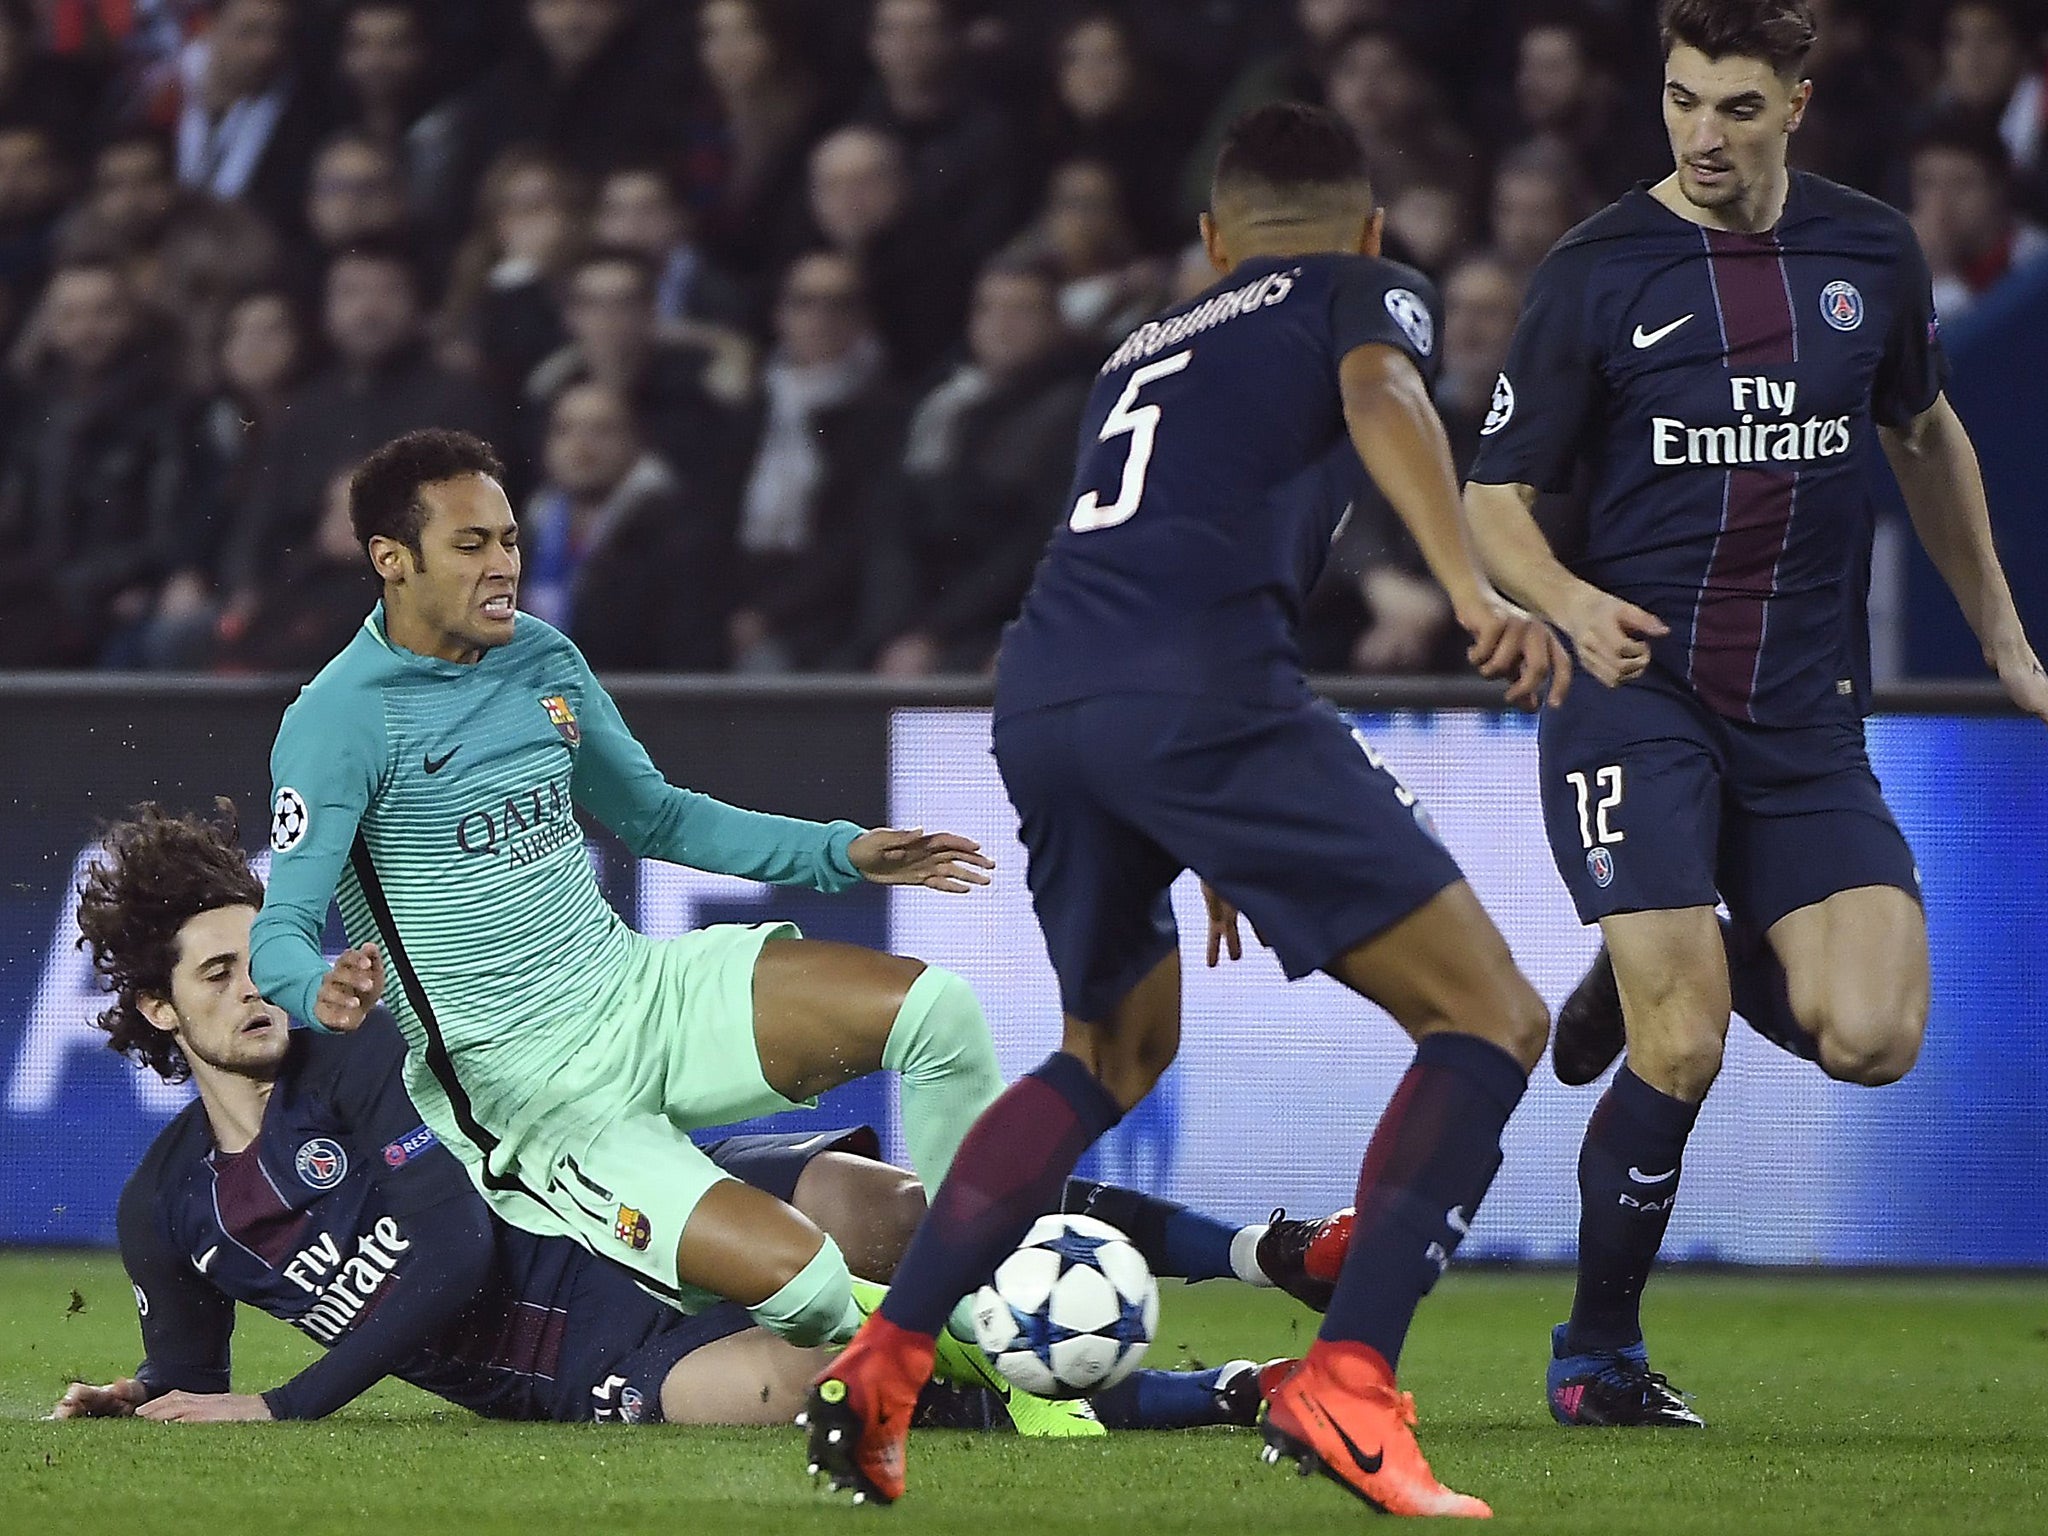 Barcelona's Neymar is felled by Paris Saint-Germain's Adrien Rabiot during the opening stages